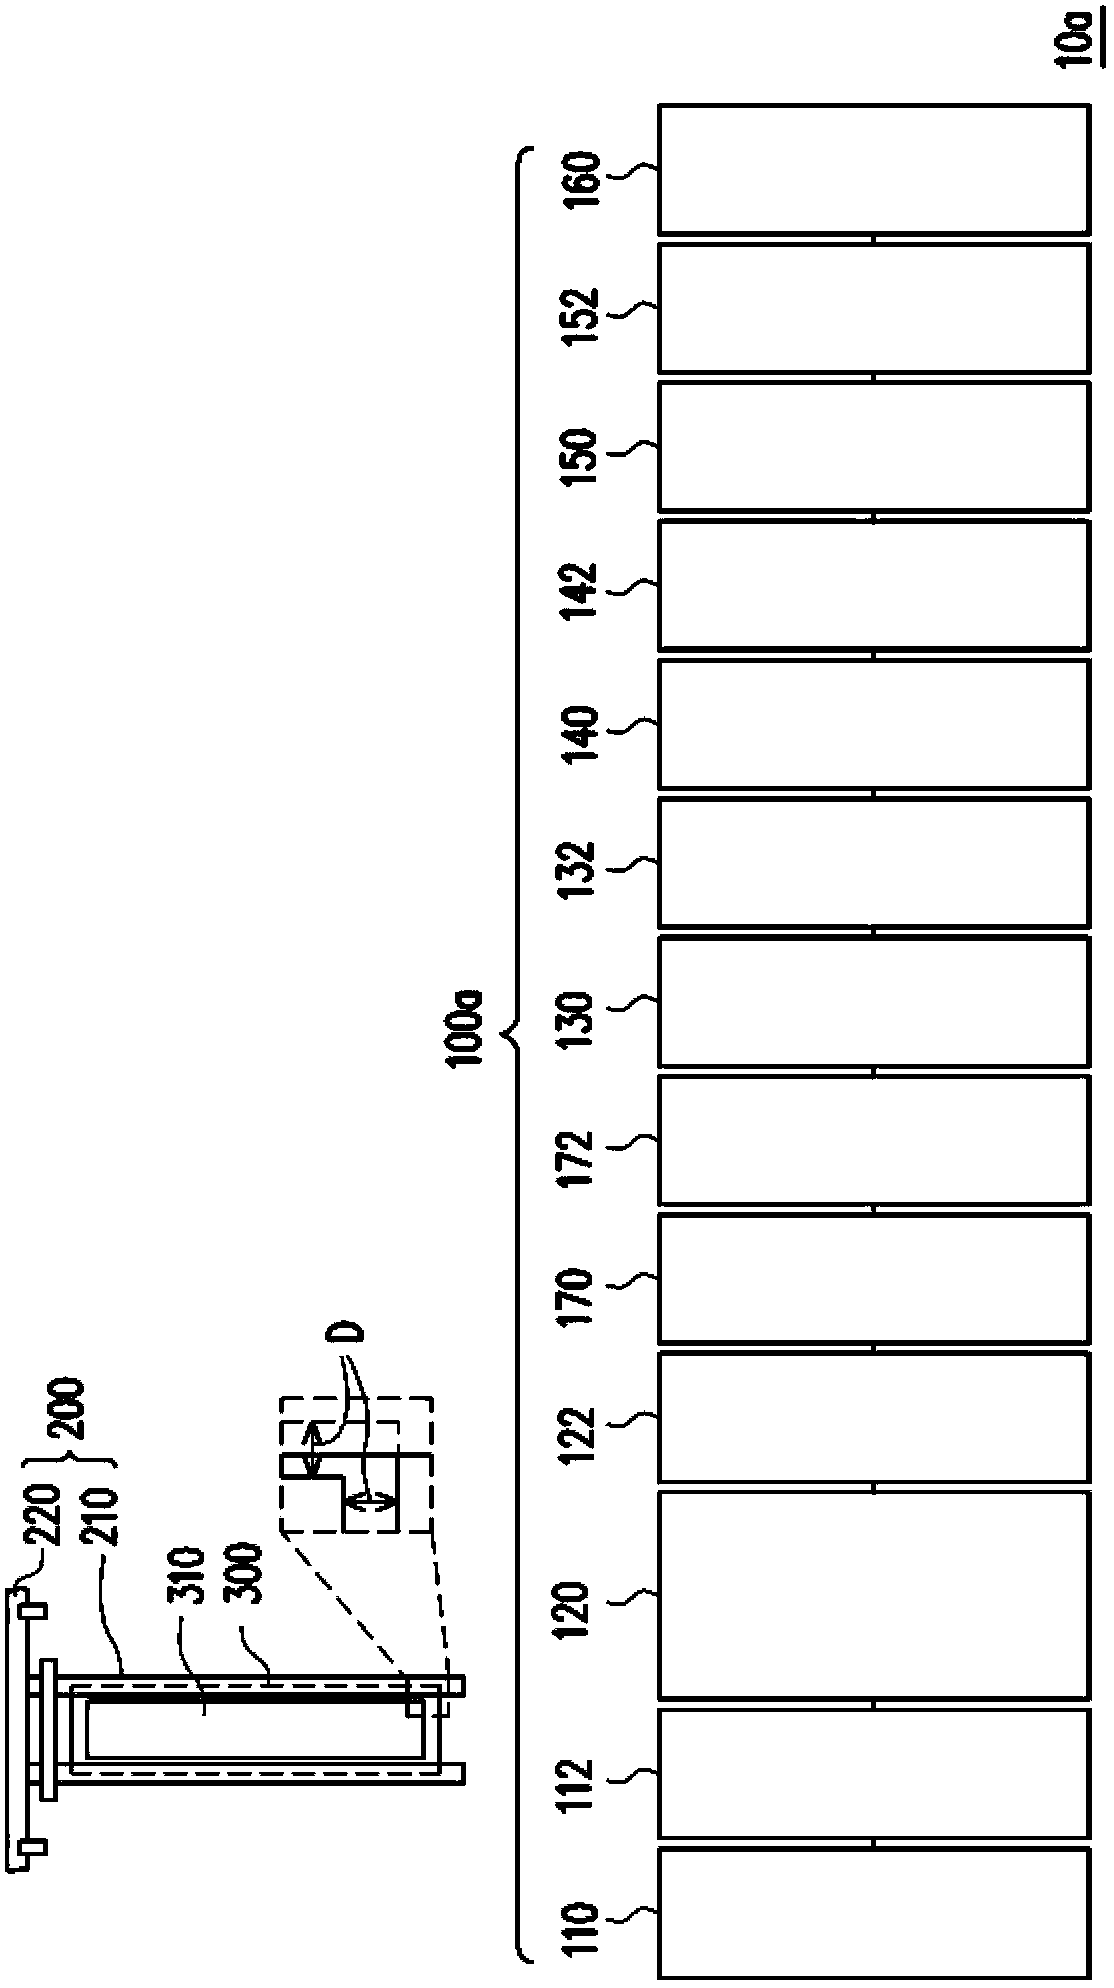 Circuit-board developing, electroplating and etching device